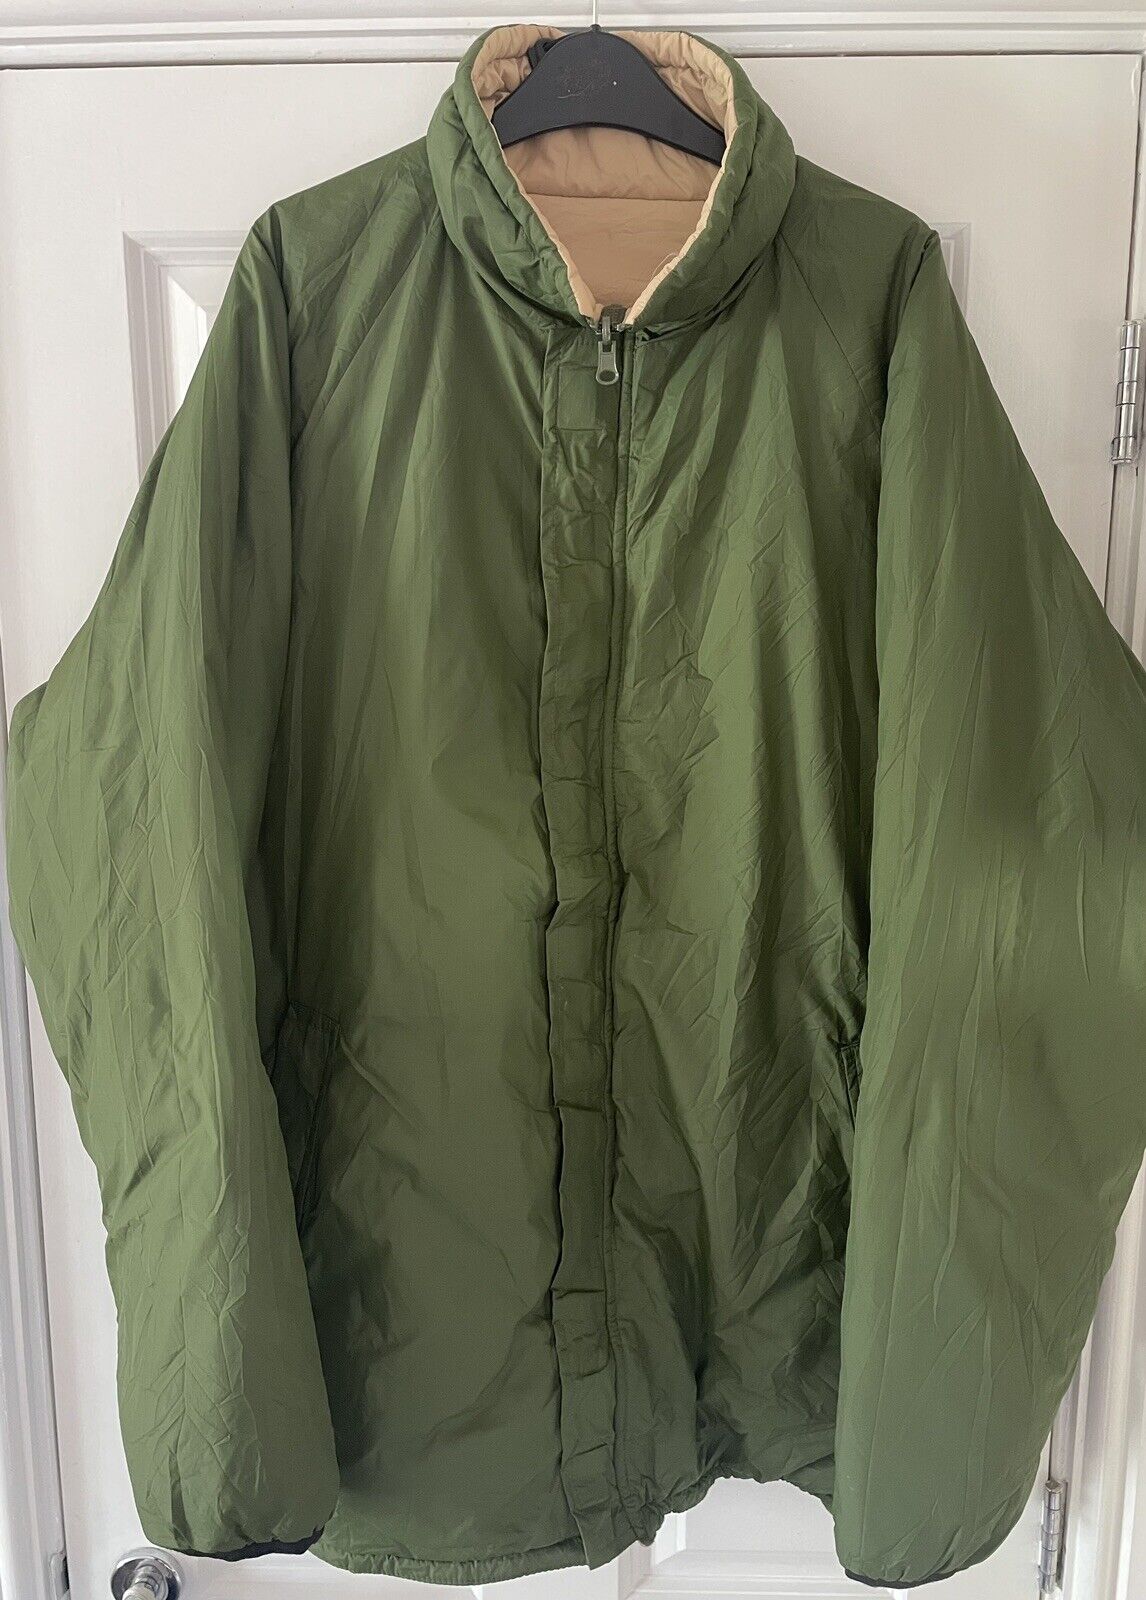 British Army Issue, Softie, Insulated, Reversible Jacket (M)